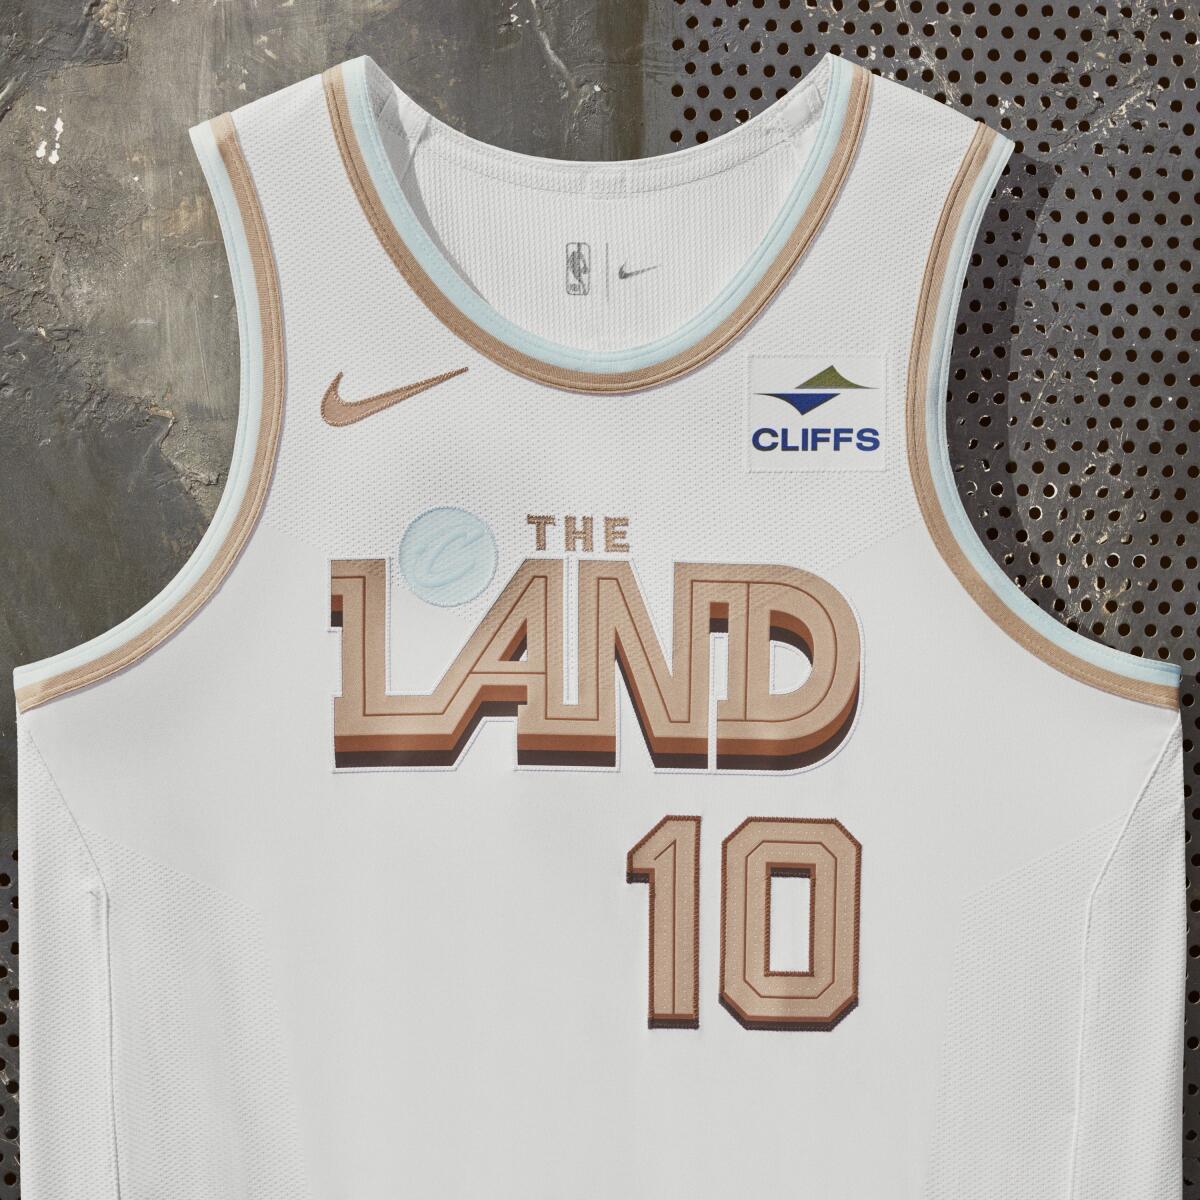 NBA City Edition jersey rankings: Breaking down every team's 2022-23 Nike  uniform, from worst to first 